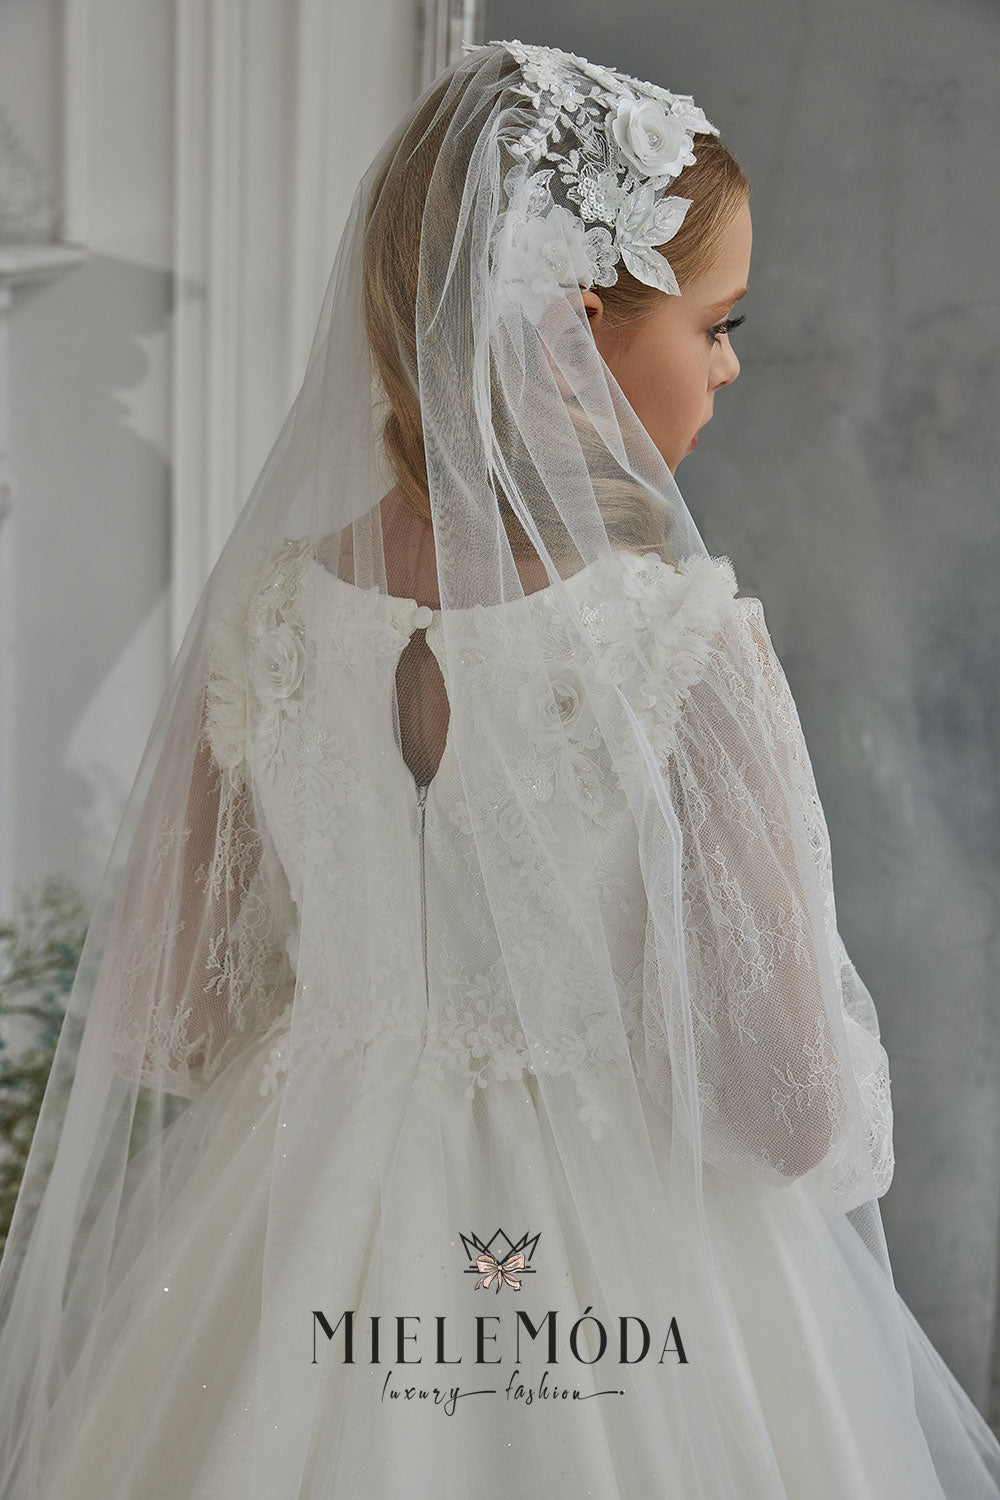 First Communion Luxury Lace Tulle Veil - Miele Moda Luxury Fashion Ivory (As Pictured) / Standard: Ships in 6-8 Business Weeks